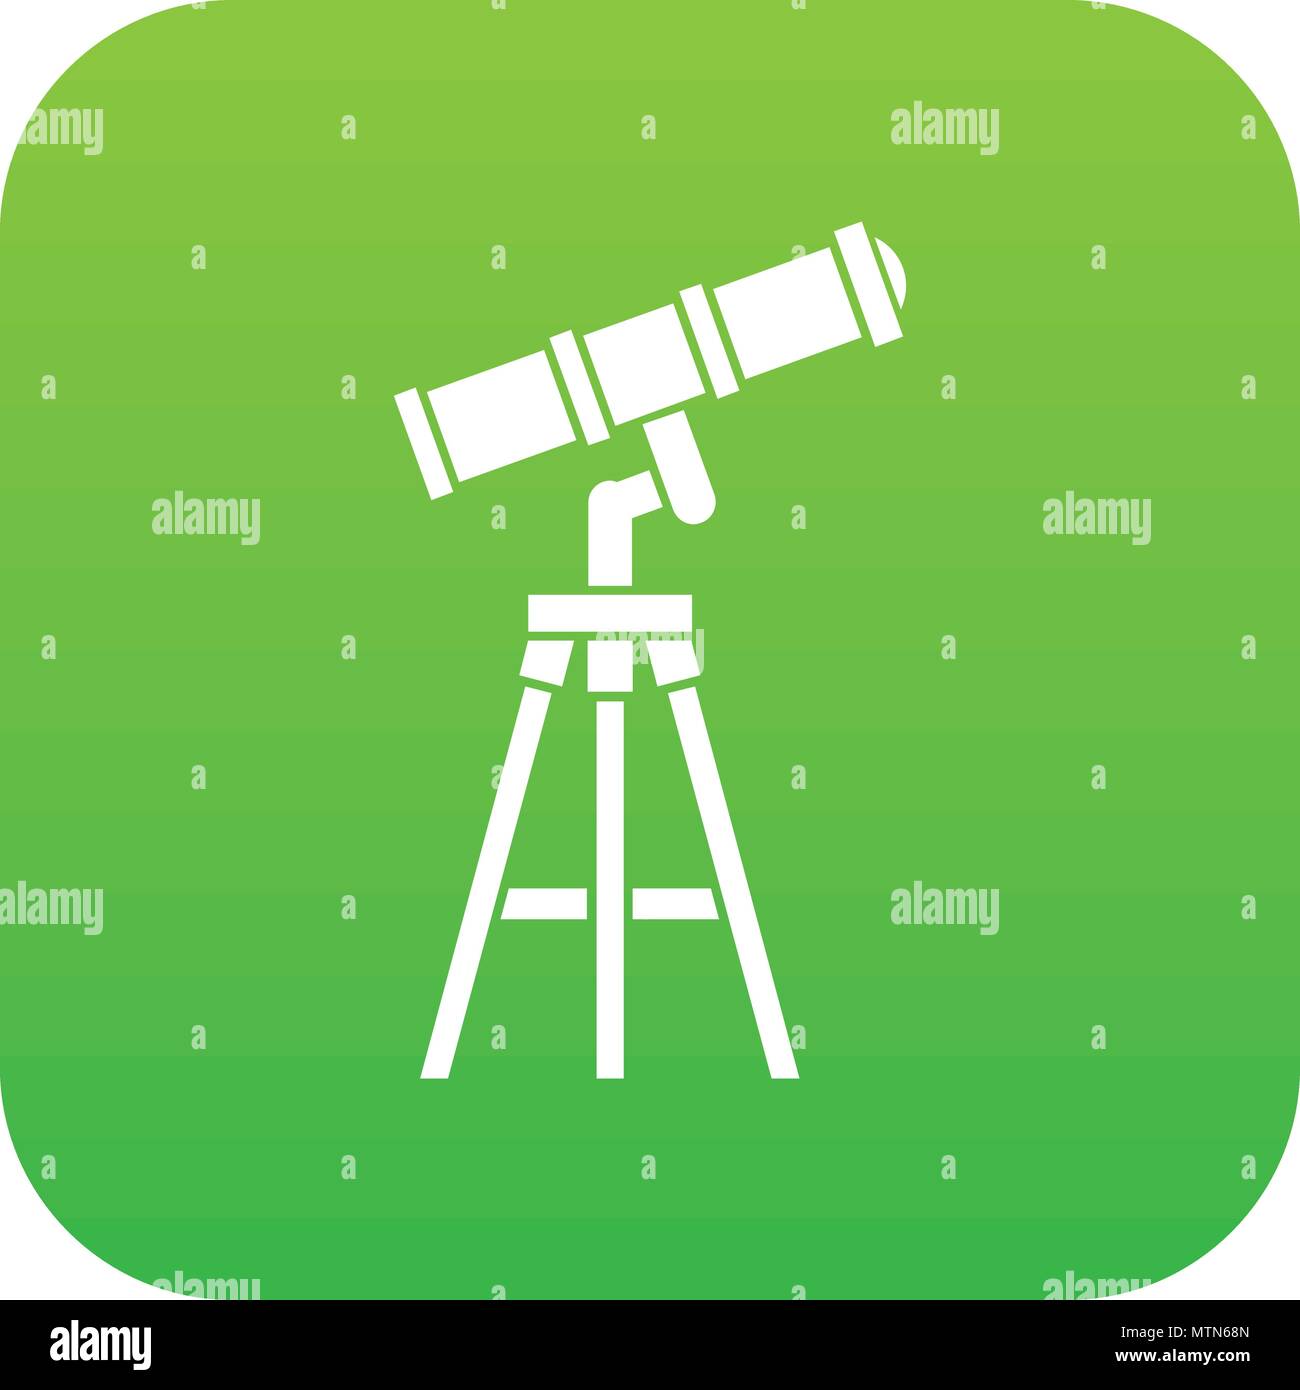 Green Telescope High Resolution Stock Photography and Images - Alamy